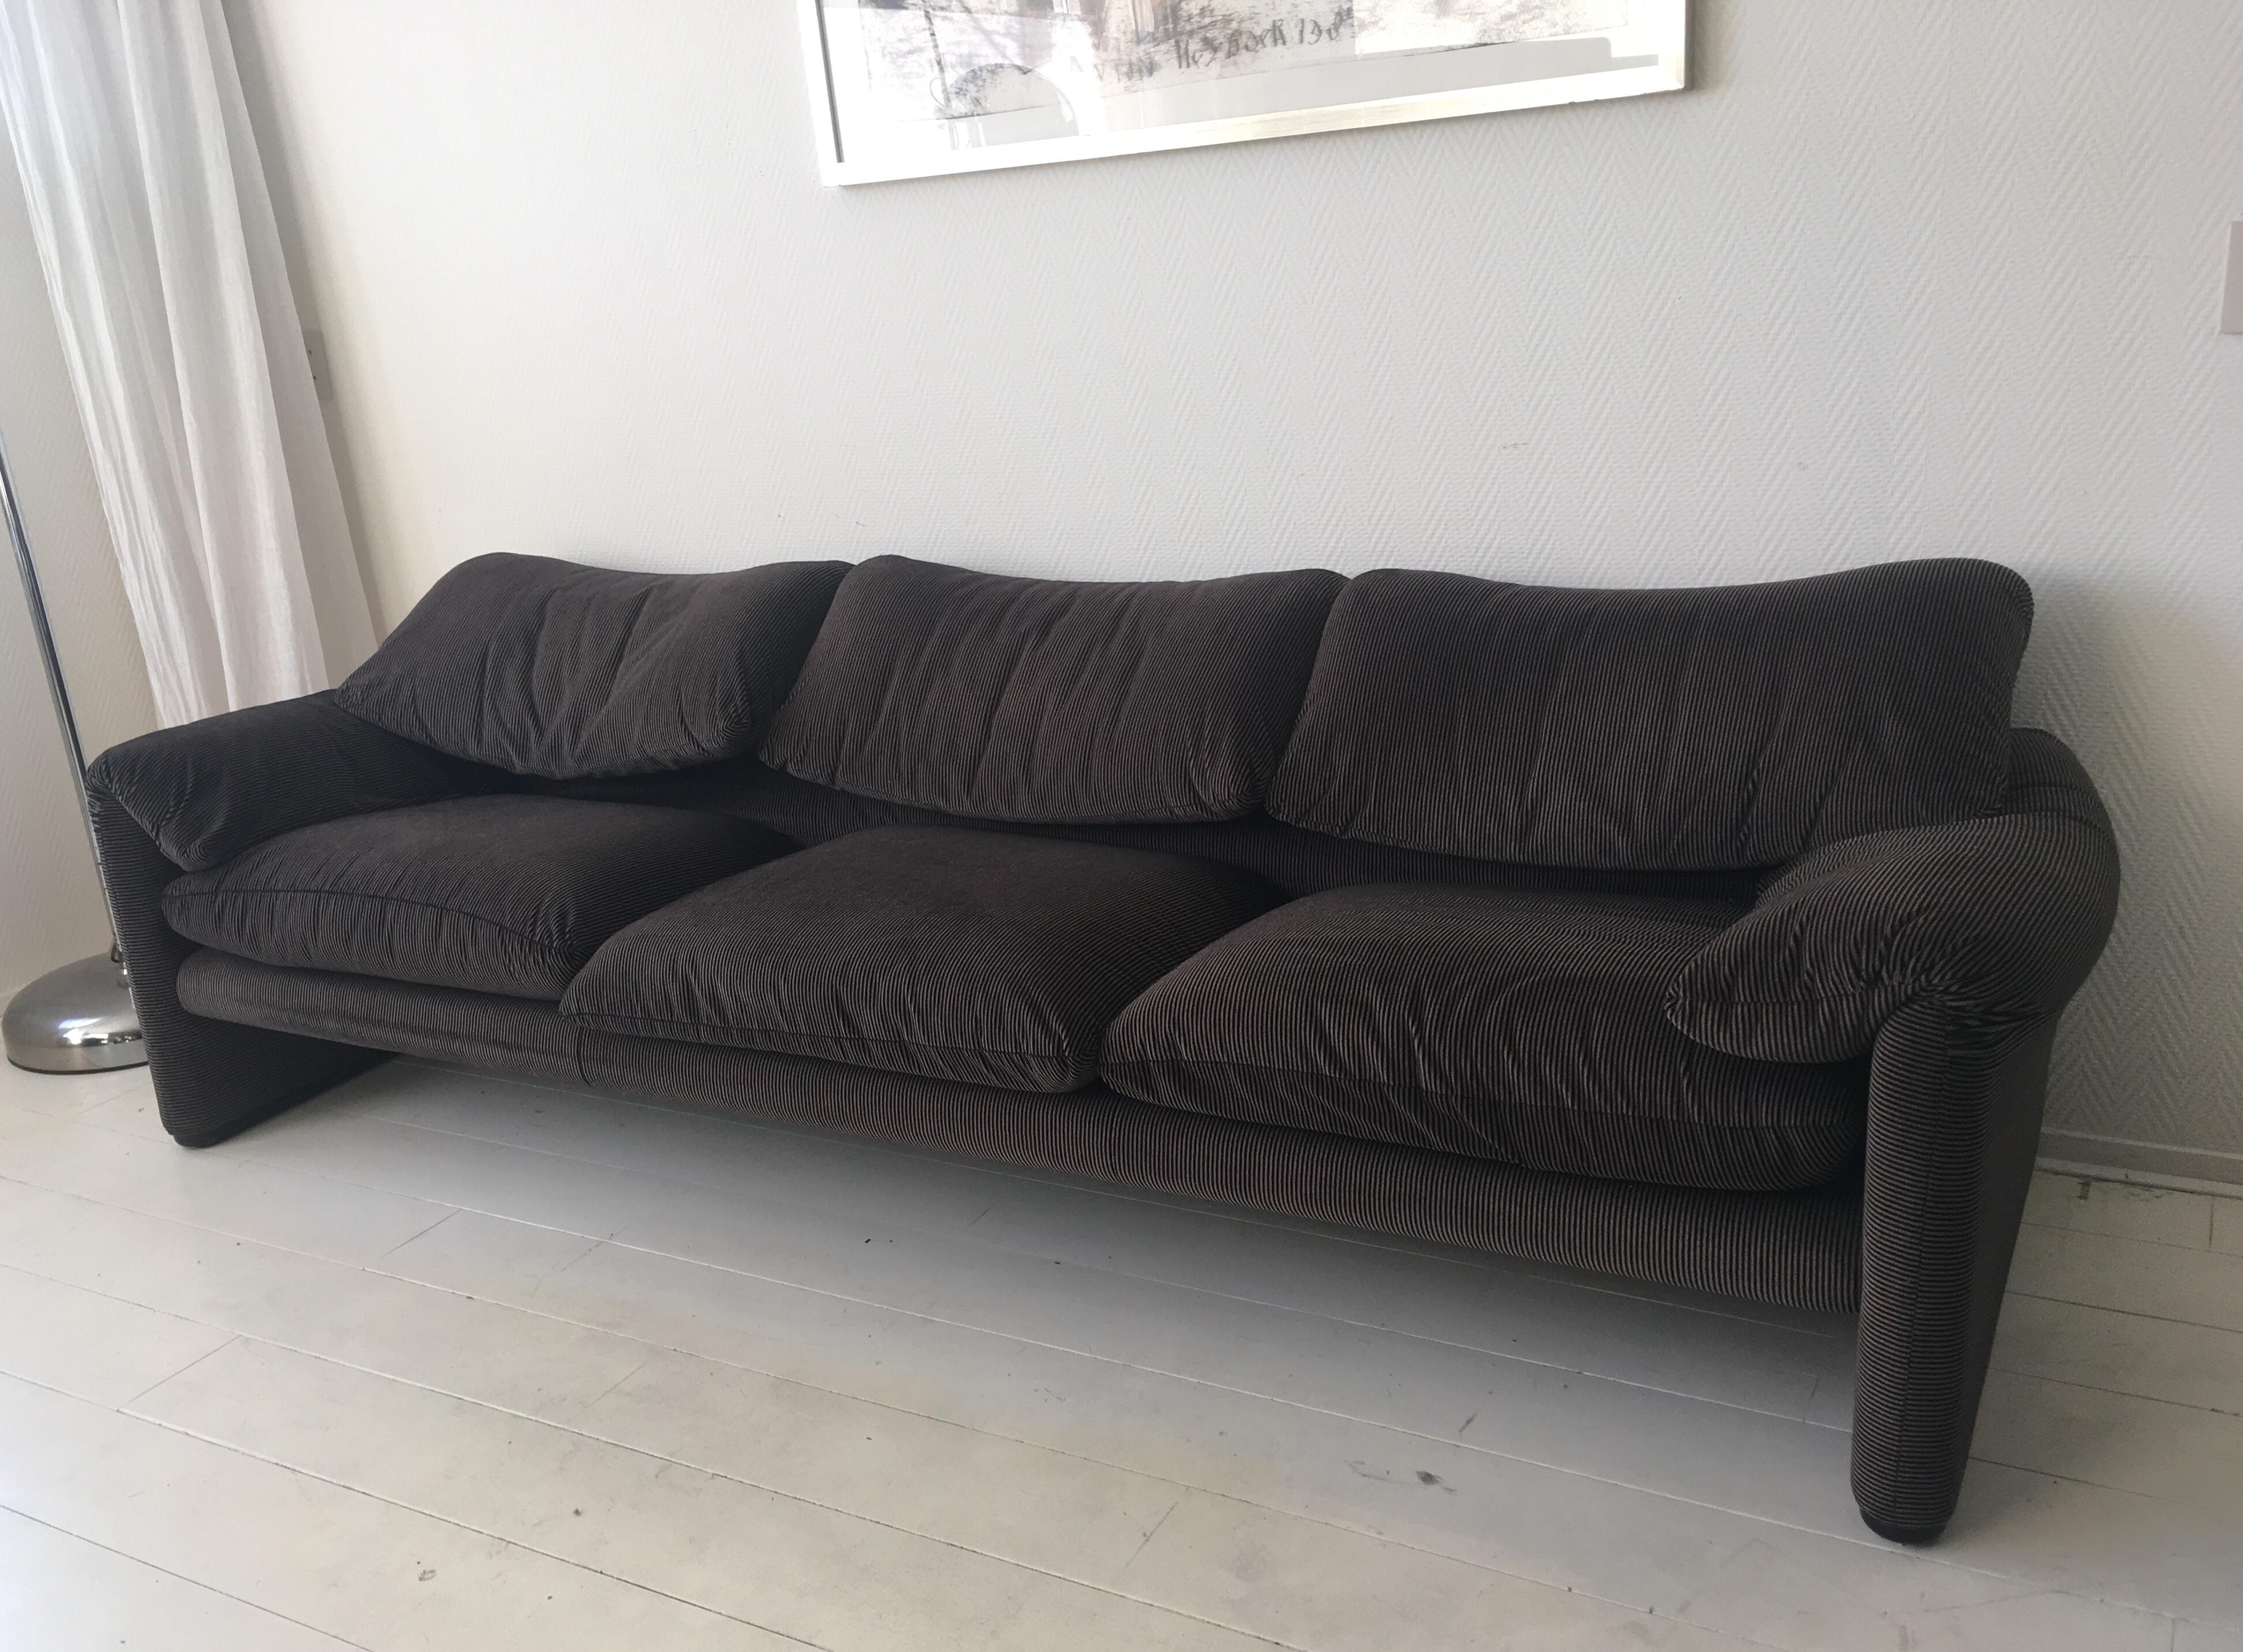 This three-seat sofa was designed by Vico Magistretti for Cassina Italy in 1973. It features a velvet bi-color fabric in grey and black. The Maralunga sofa also features separately adjustable backrests and wears the Manufacturer's Label. It remains